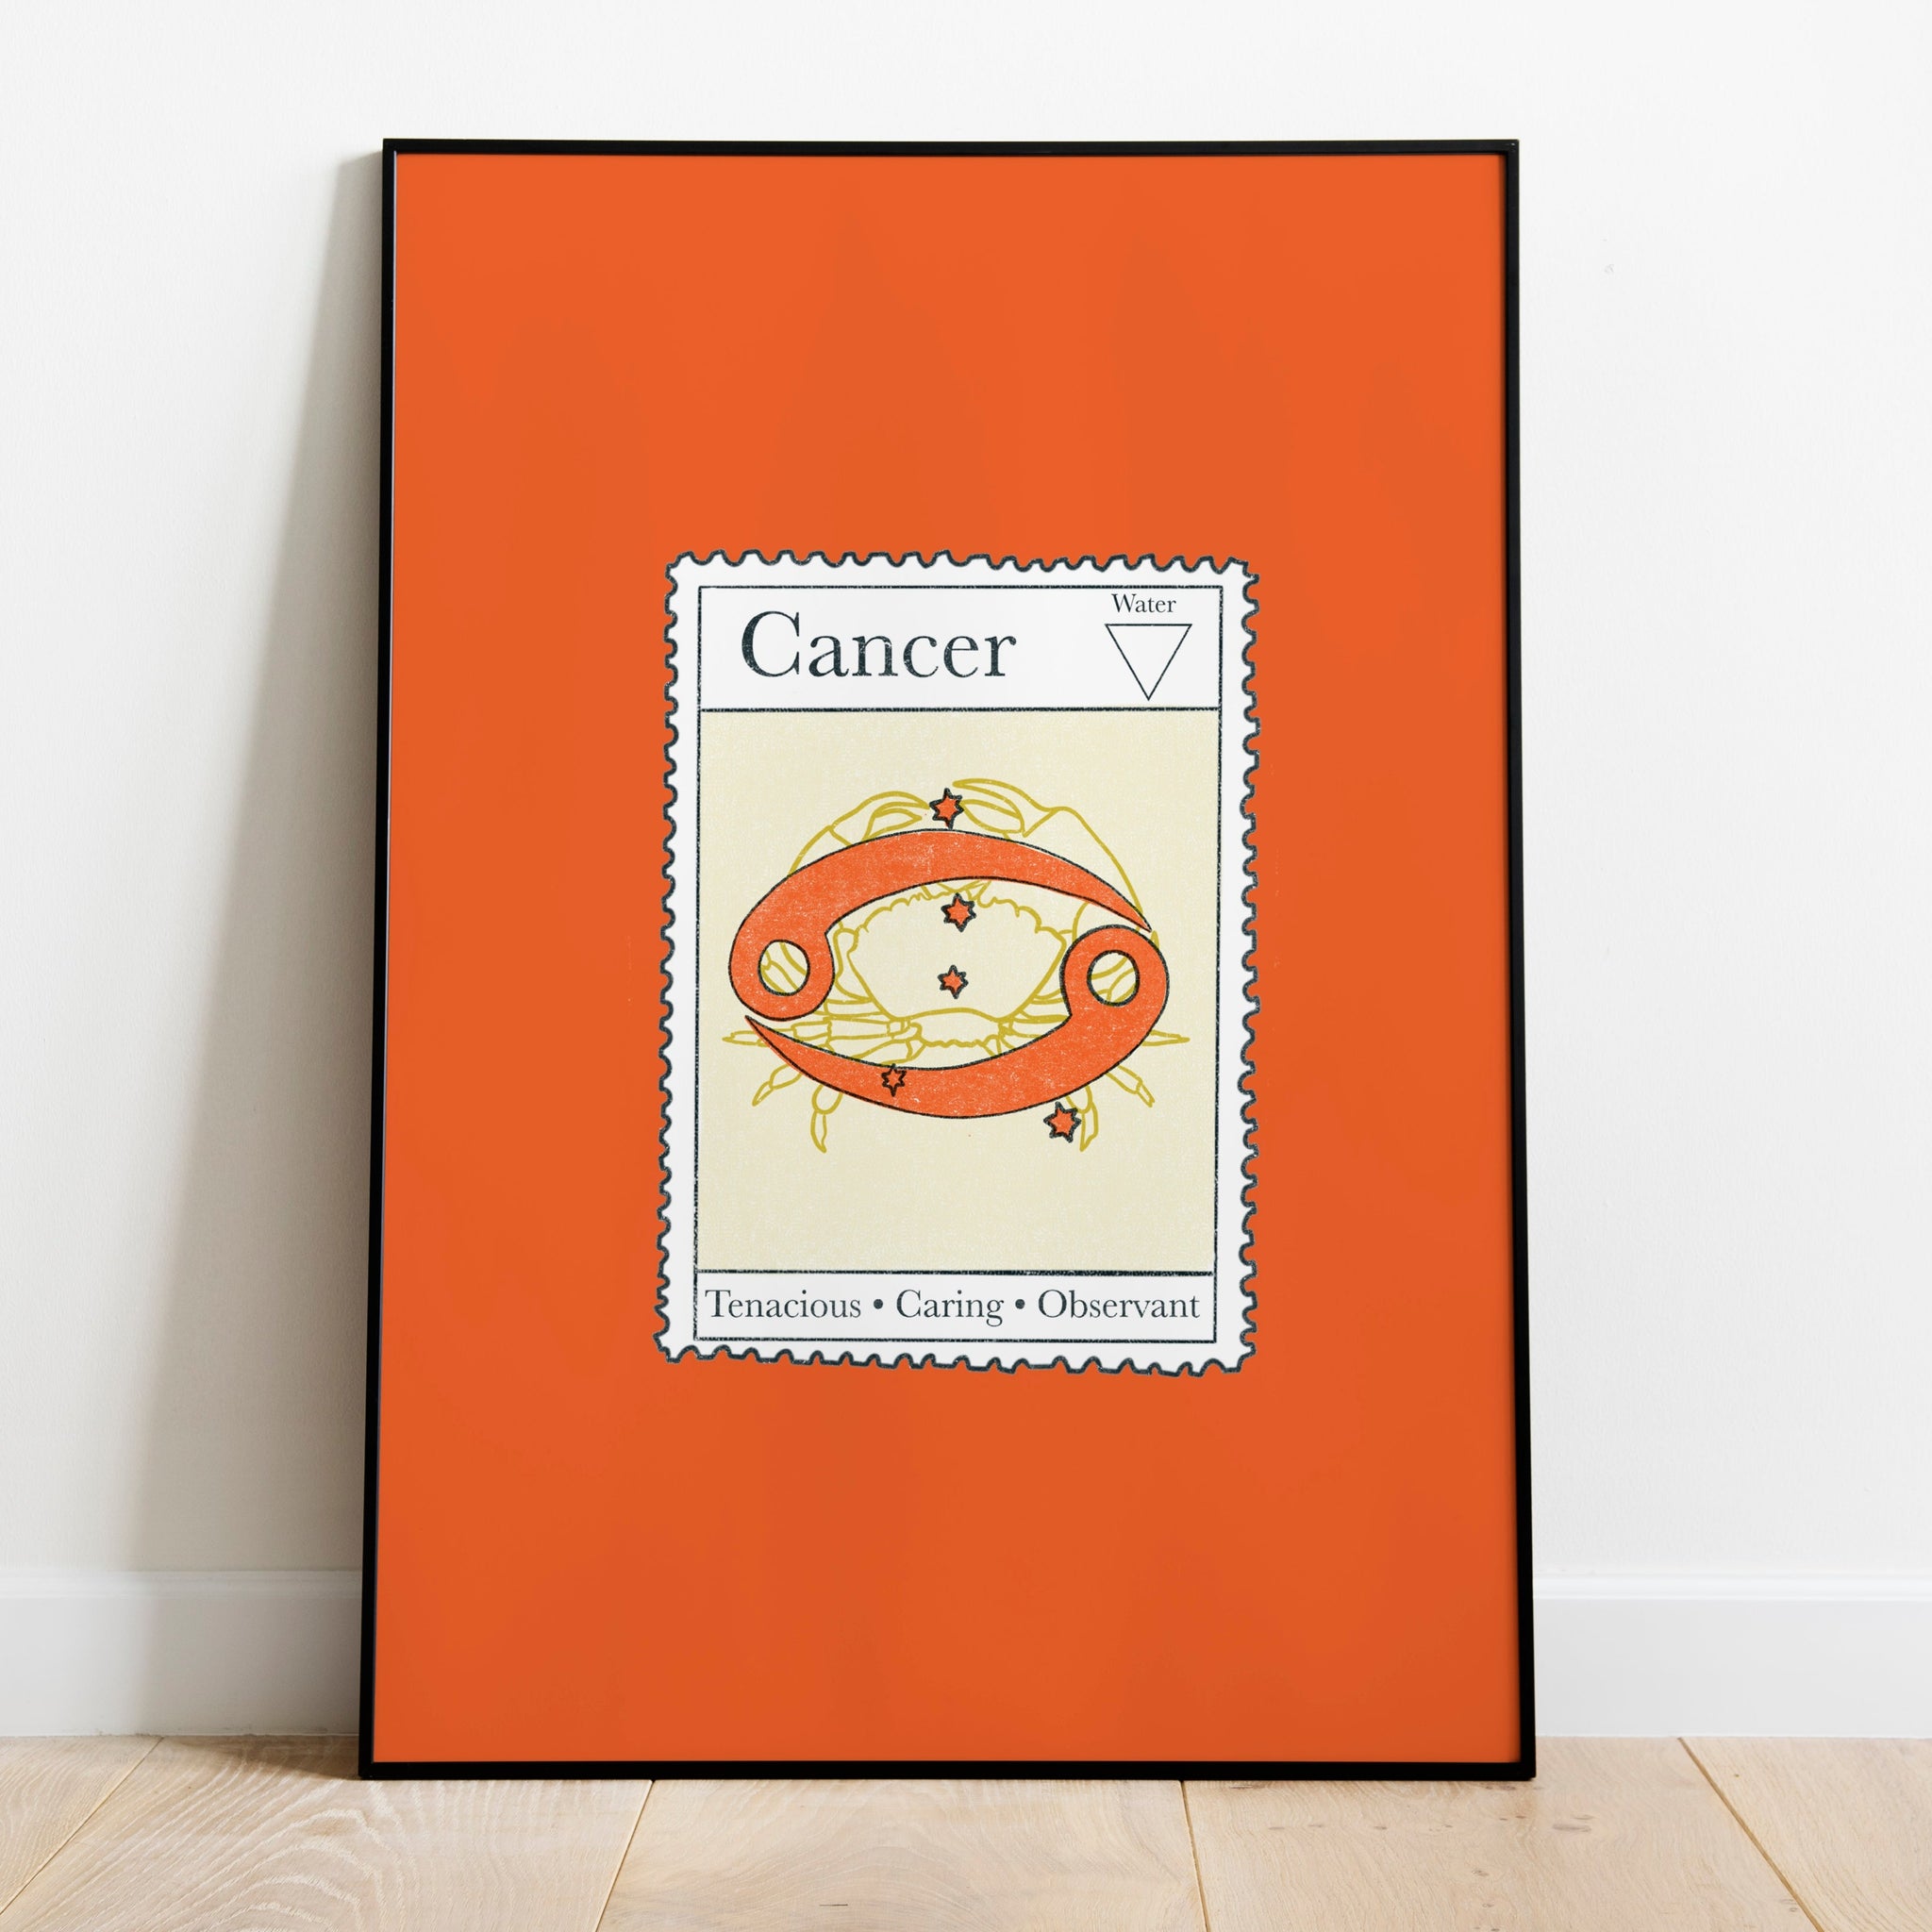 Image of a framed art print leaning against the wall. The art print itself is a postage stamp representing the star sign of cancer. The print is bright and colourful in shades of green, cream and tomato red.